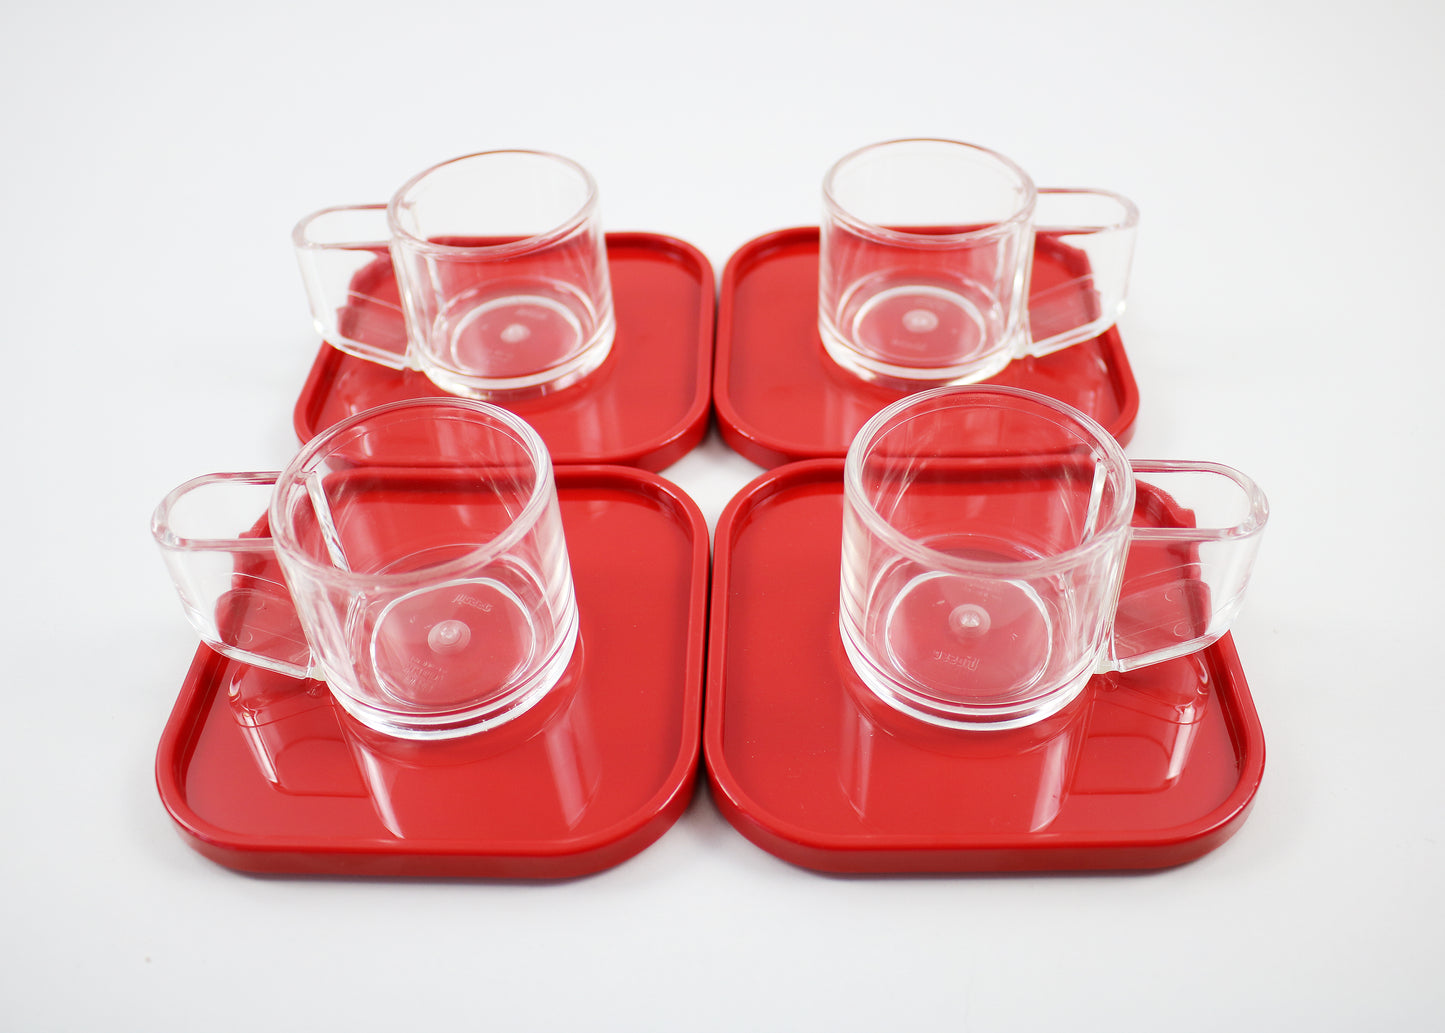 Pino Spagnolo for Biesse 1970s espresso set for four - unused vintage stock